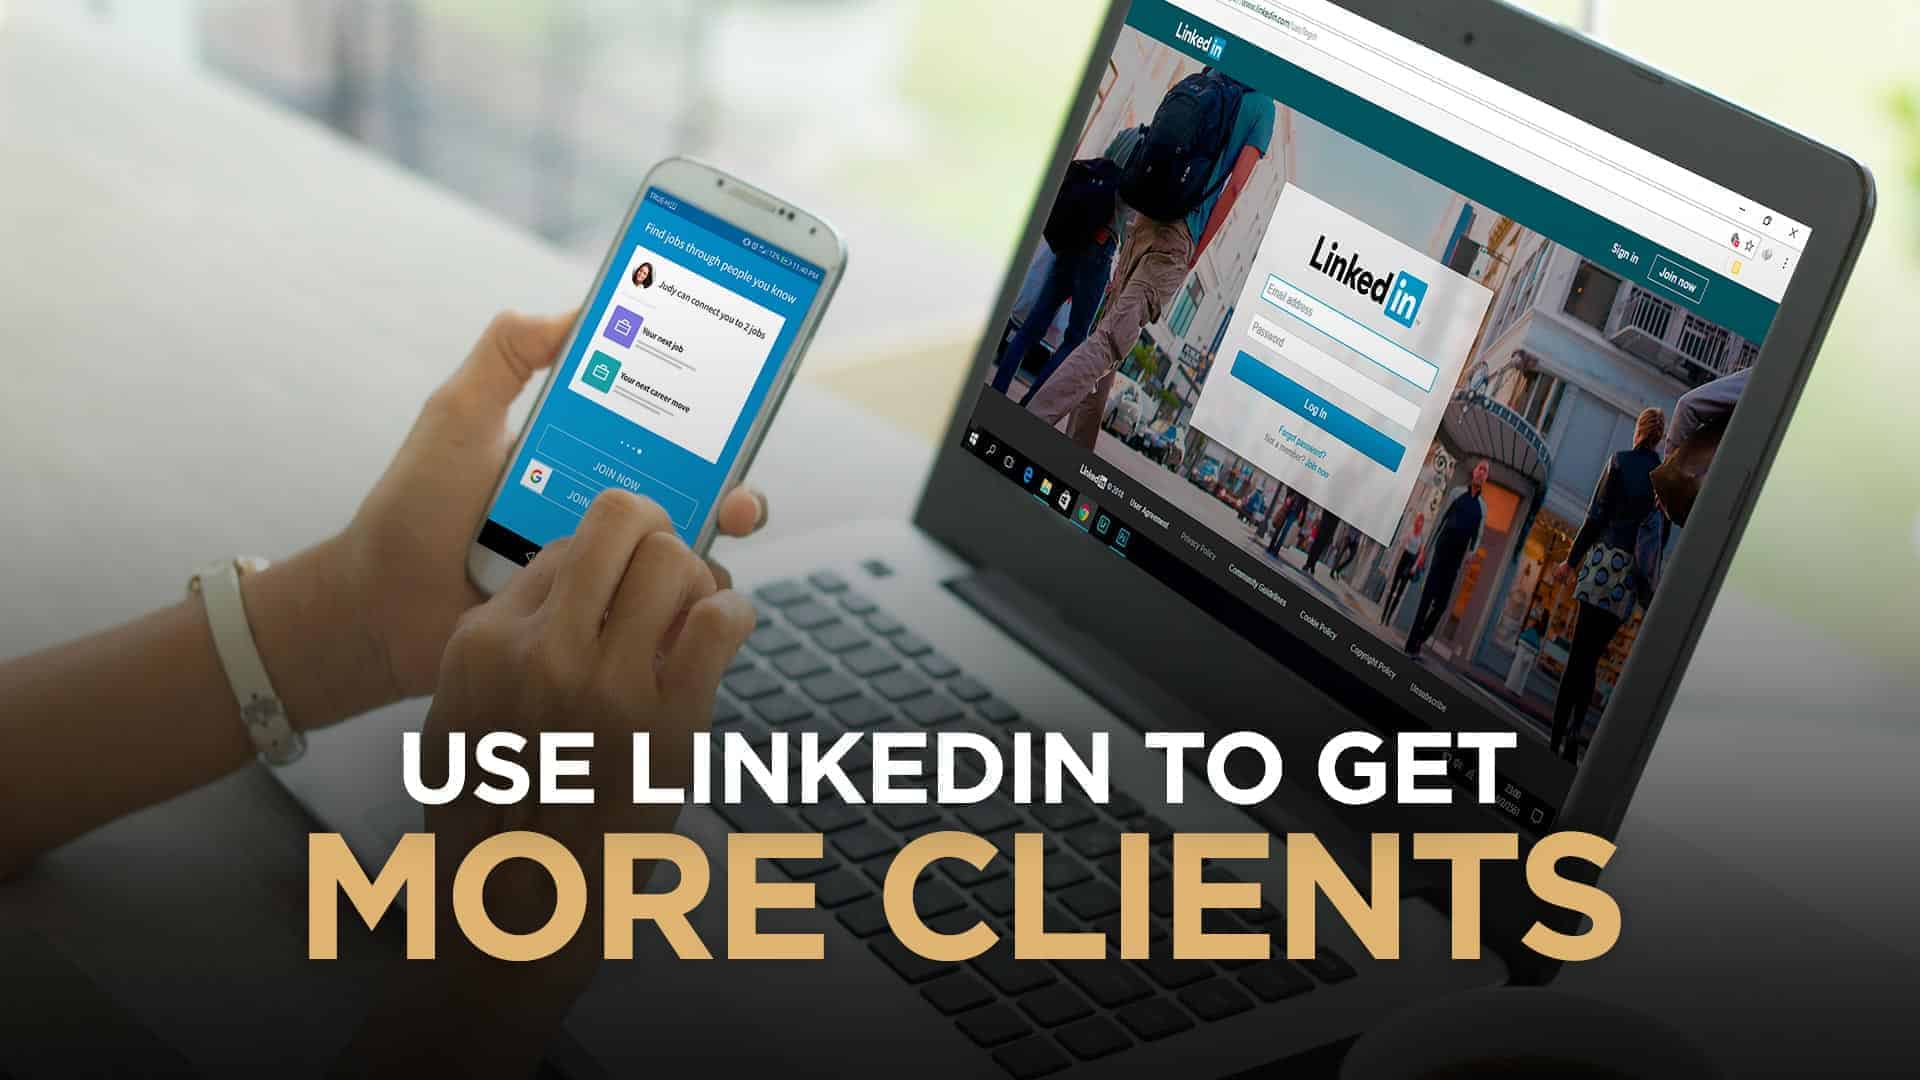 IN-How-To-Use-LinkedIn-To-Get-More-Clients-OPTIMIZED